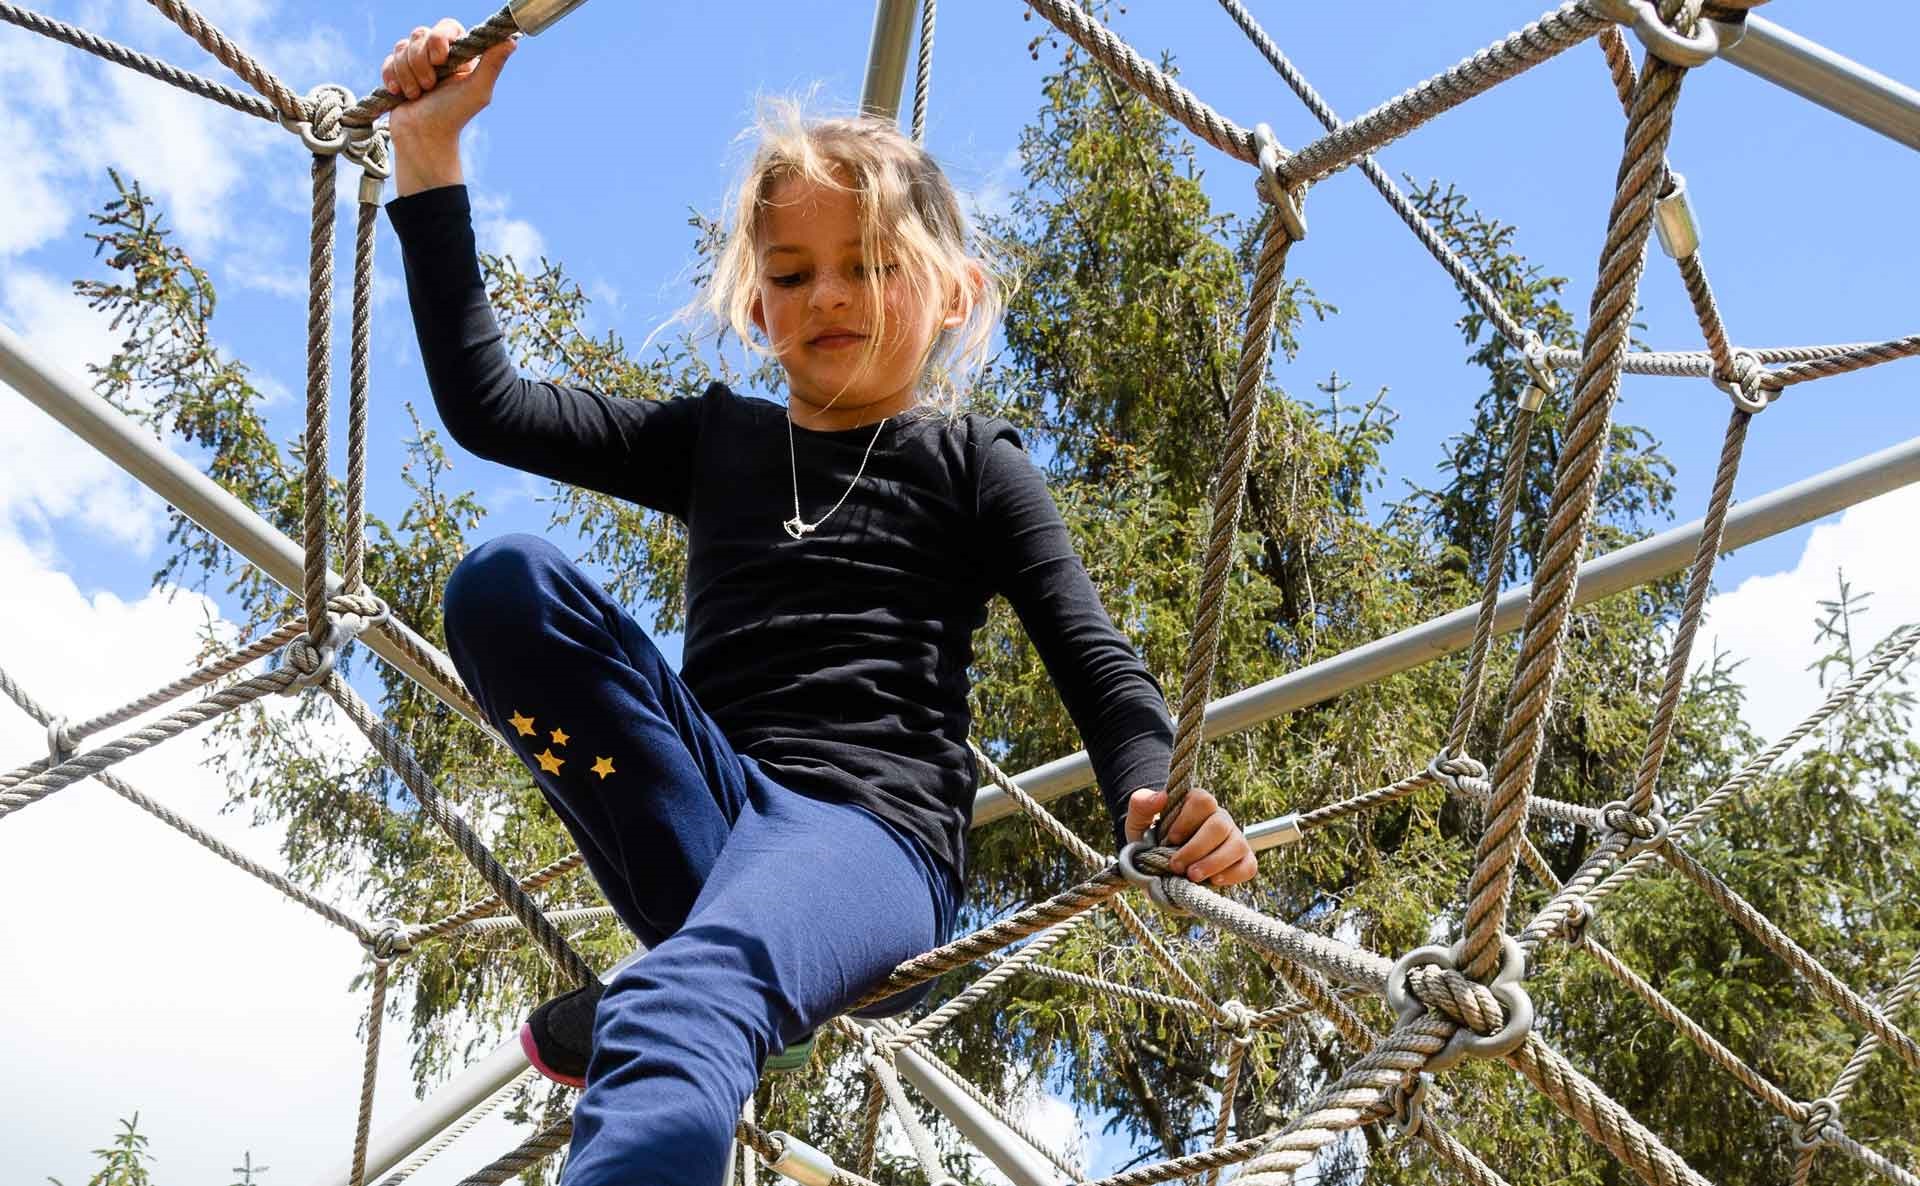 Photo shows young girl climbing on playground ropes.